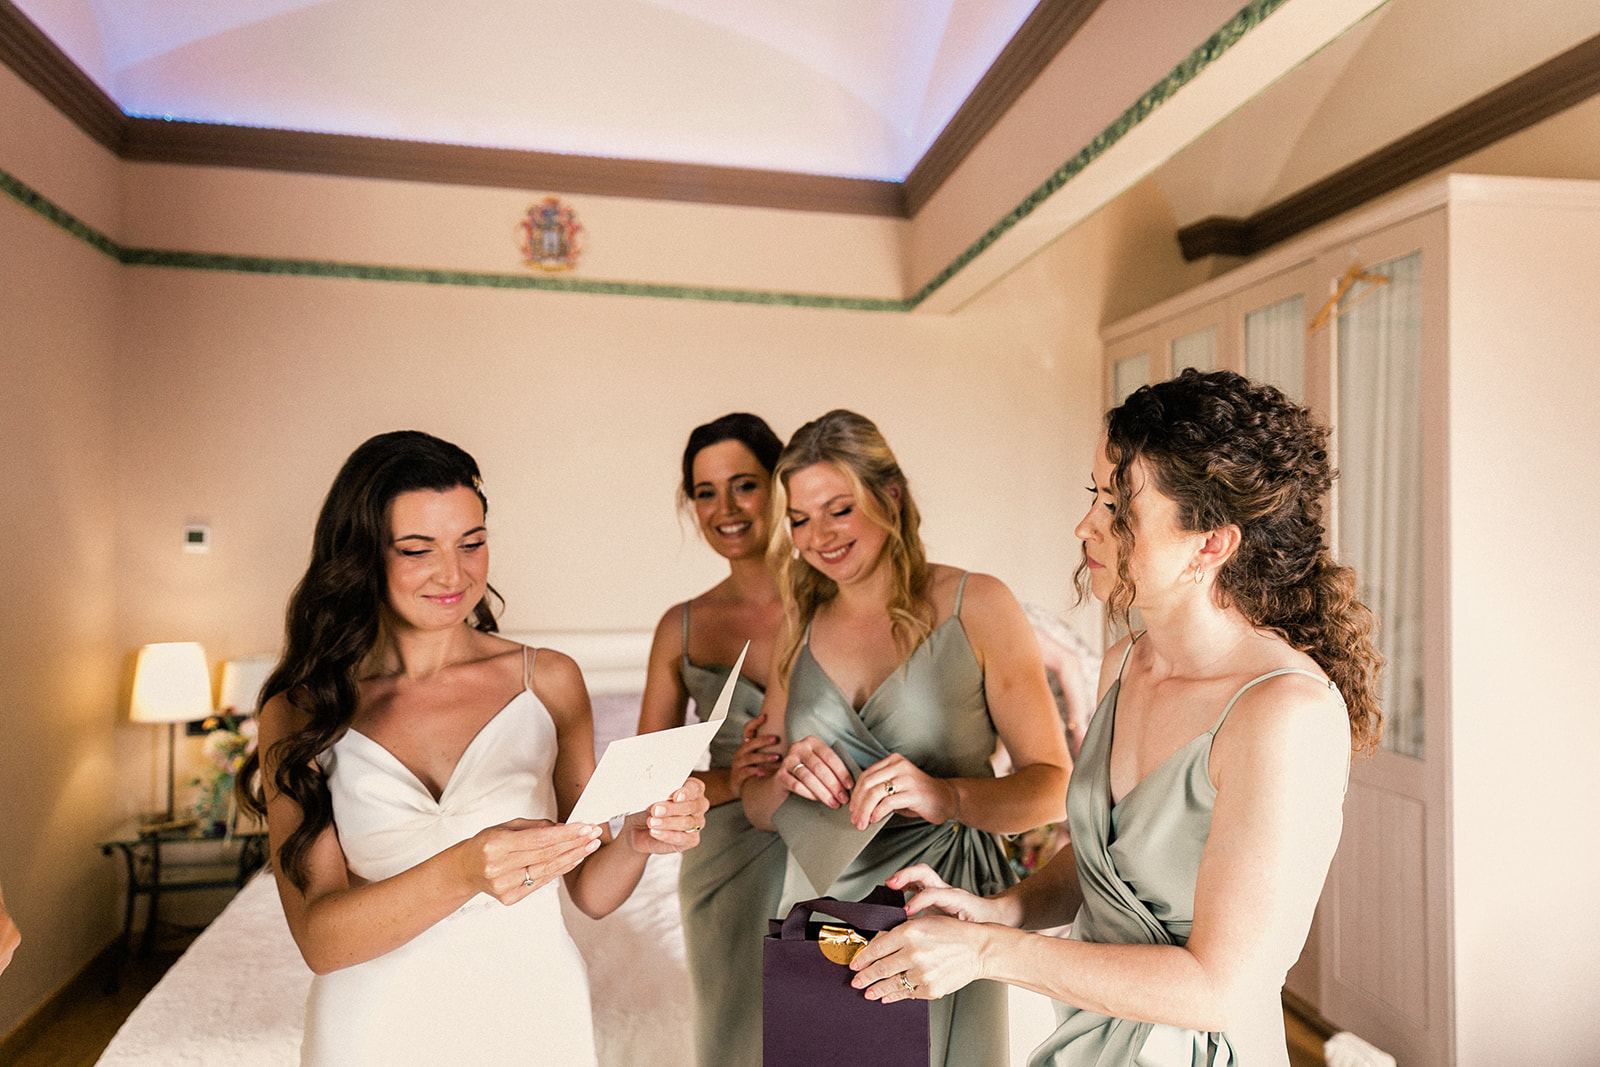 A bride with standing in her wedding dress standing with her brides maids, reading a letter